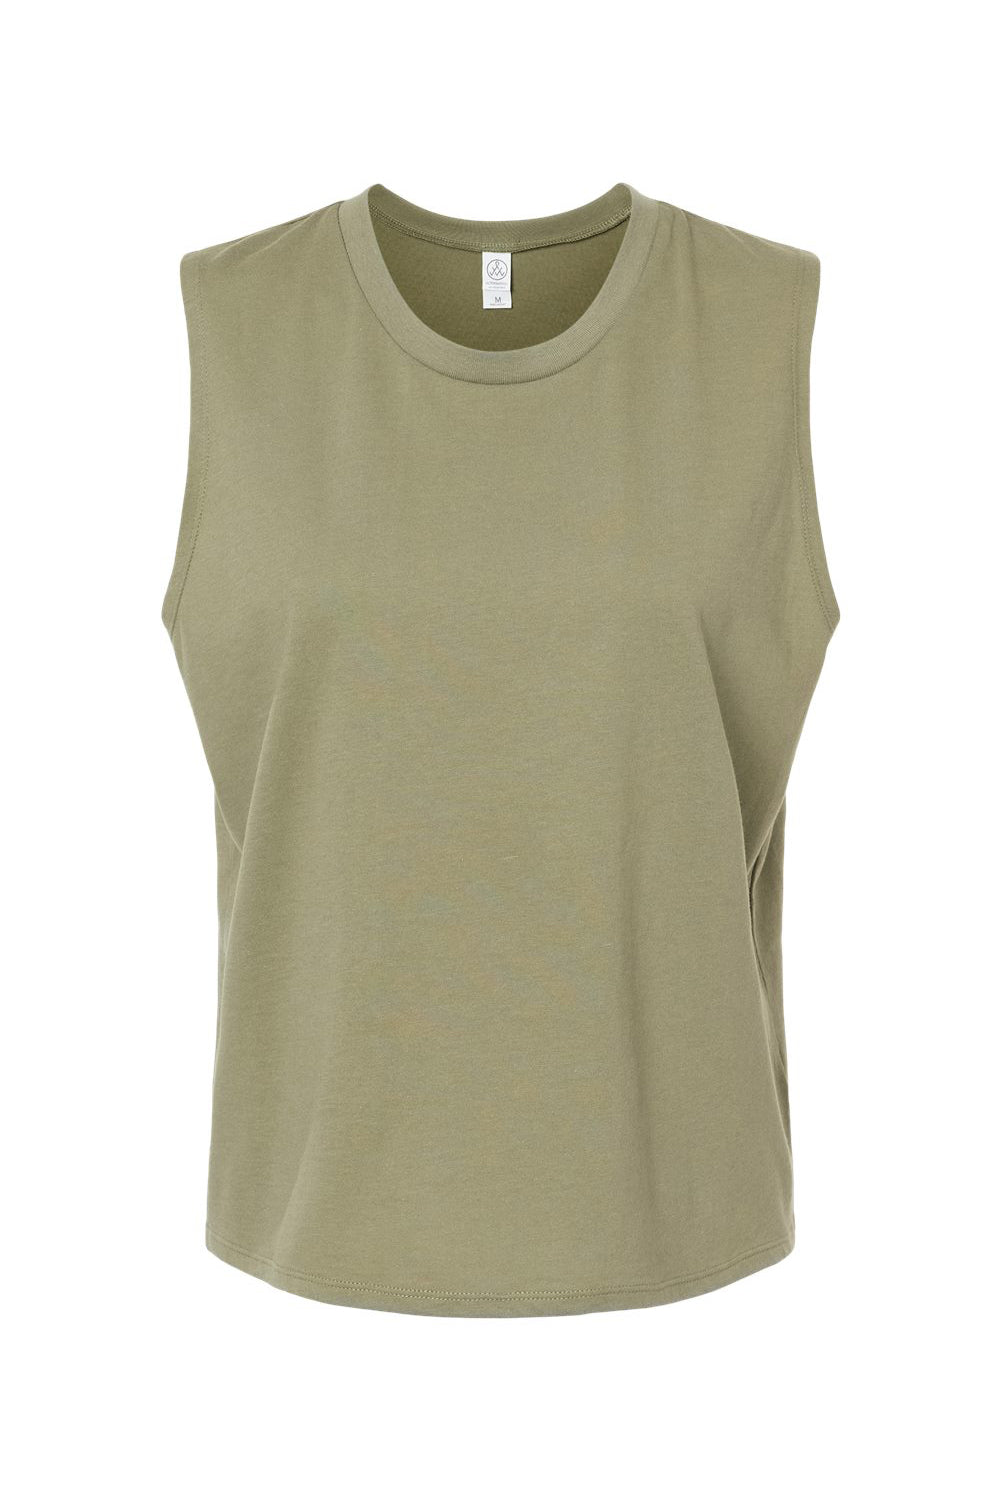 Alternative 1174 Womens Go To Crop Muscle Tank Top Military Green Flat Front